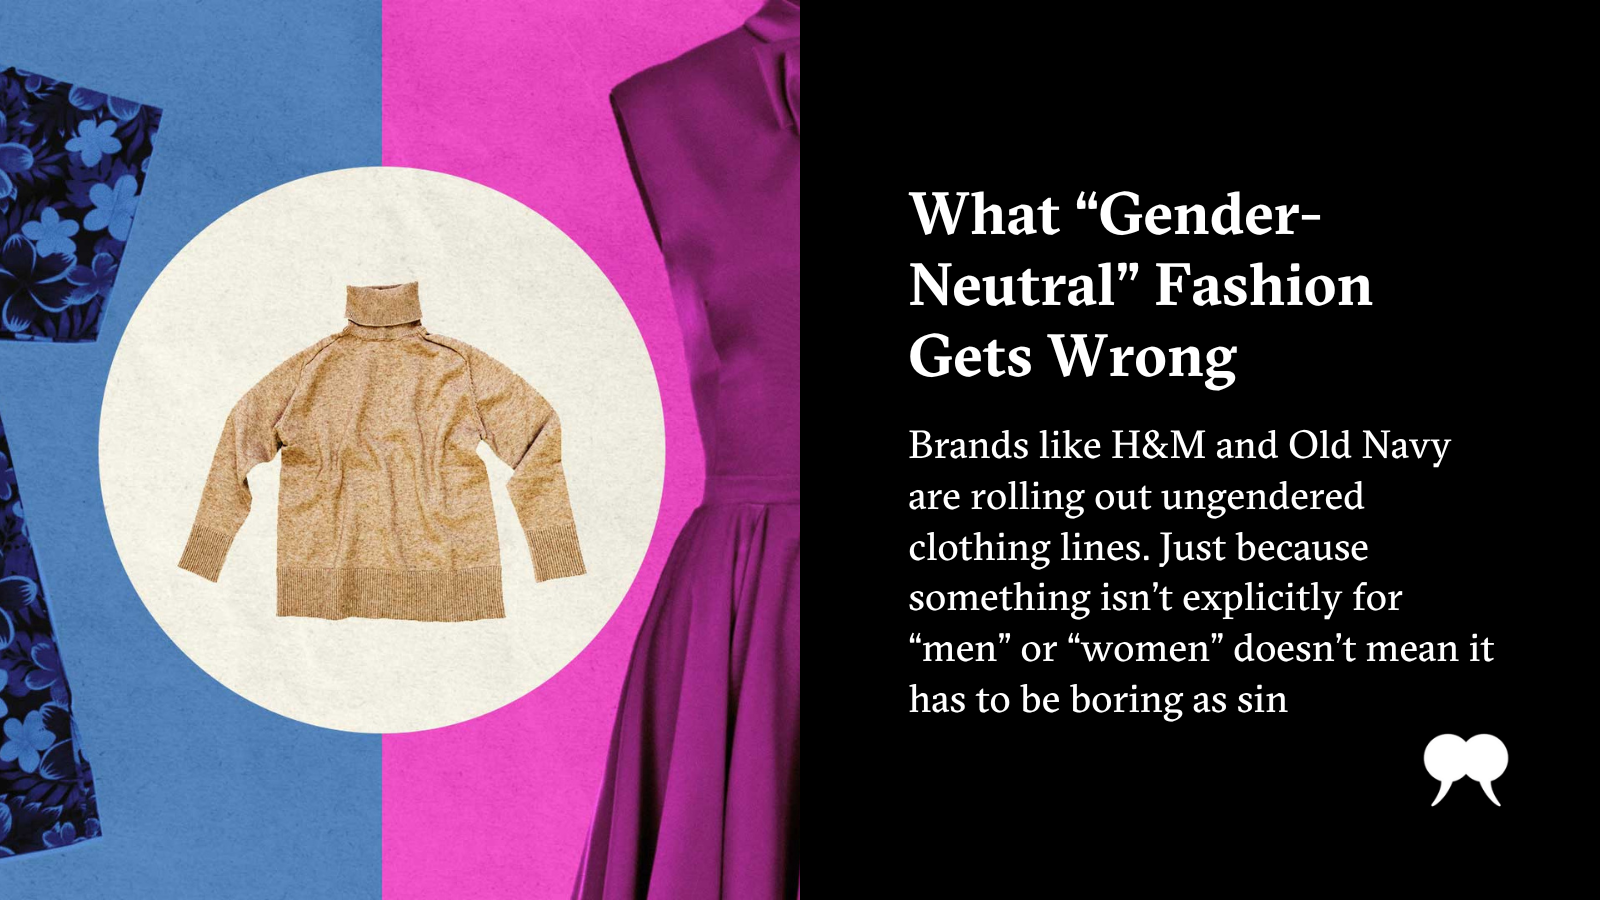 What “Gender-Neutral” Fashion Gets Wrong